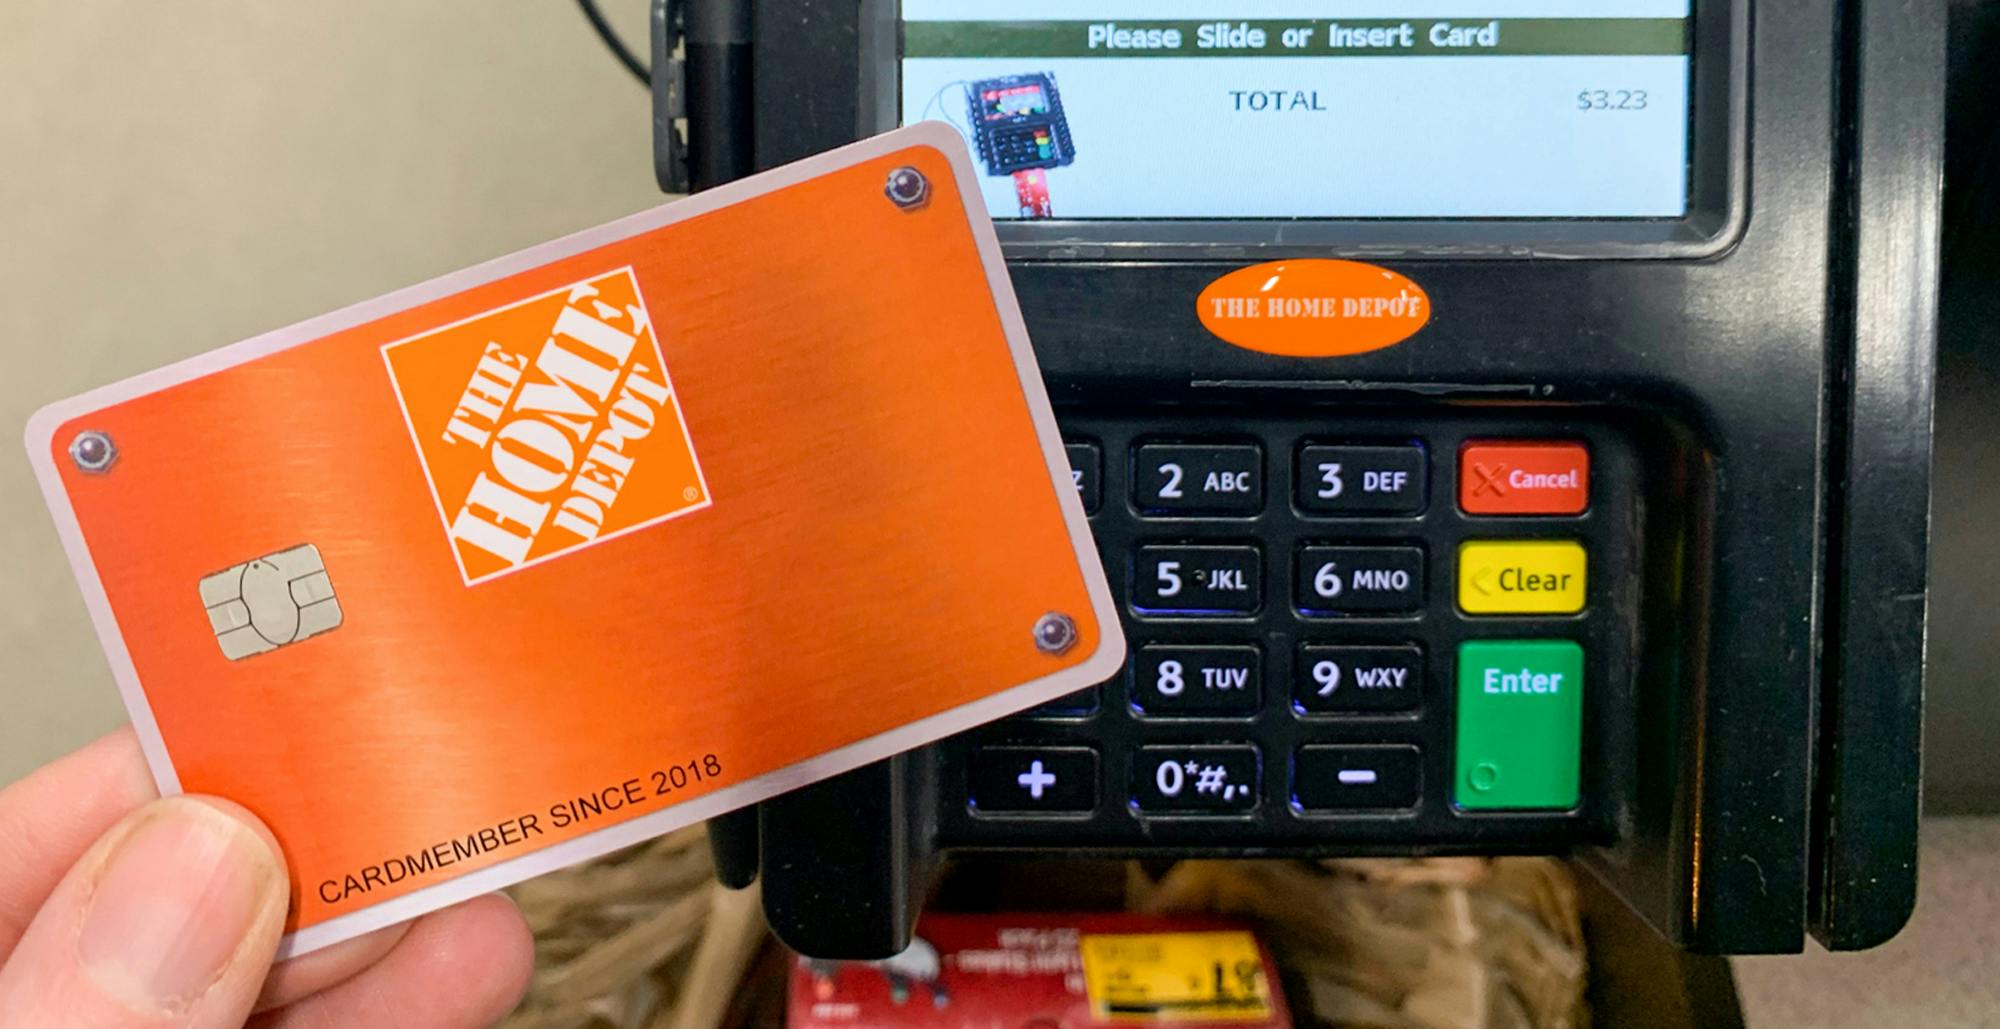 The Home Depot Credit Card Isn't Much to Write Home About: Here's Why